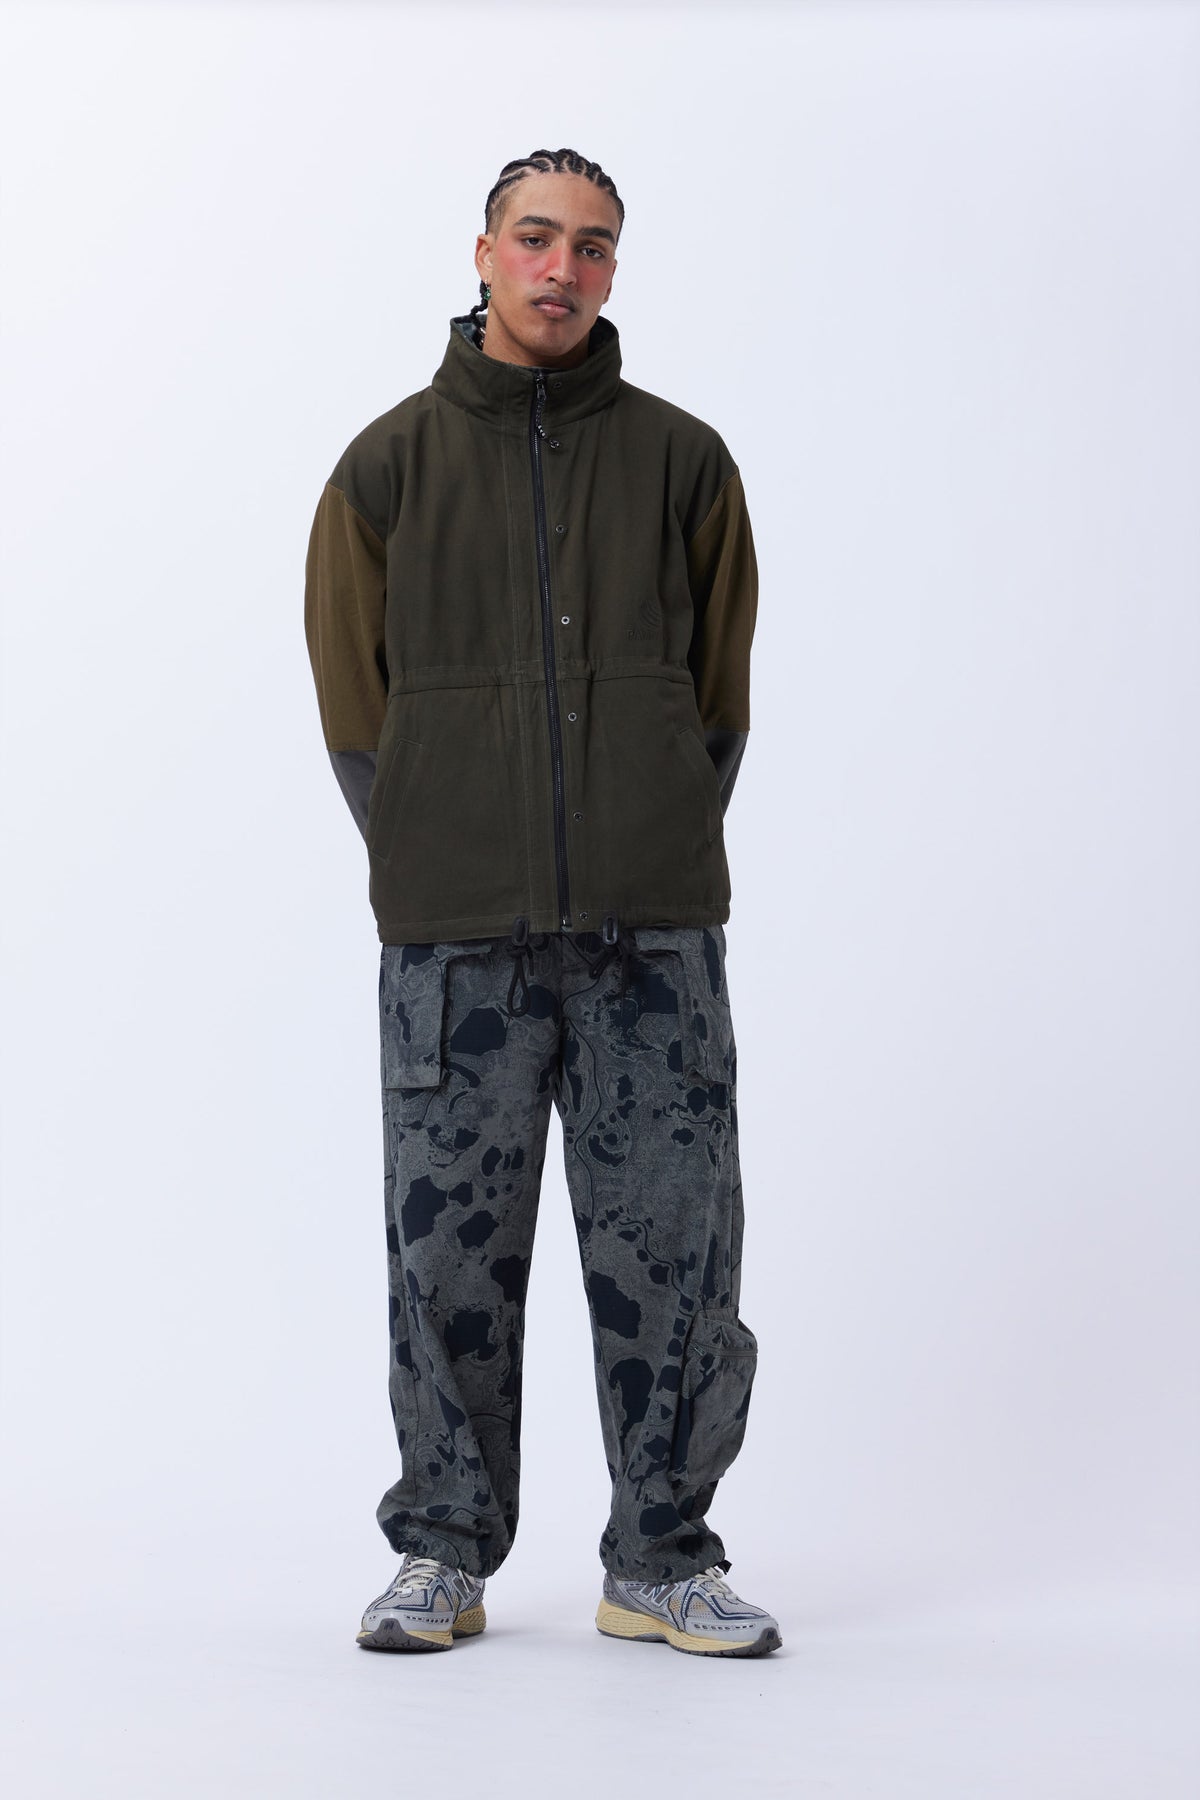 P.A.M. Reversible Geo Mapping Parka - Multi